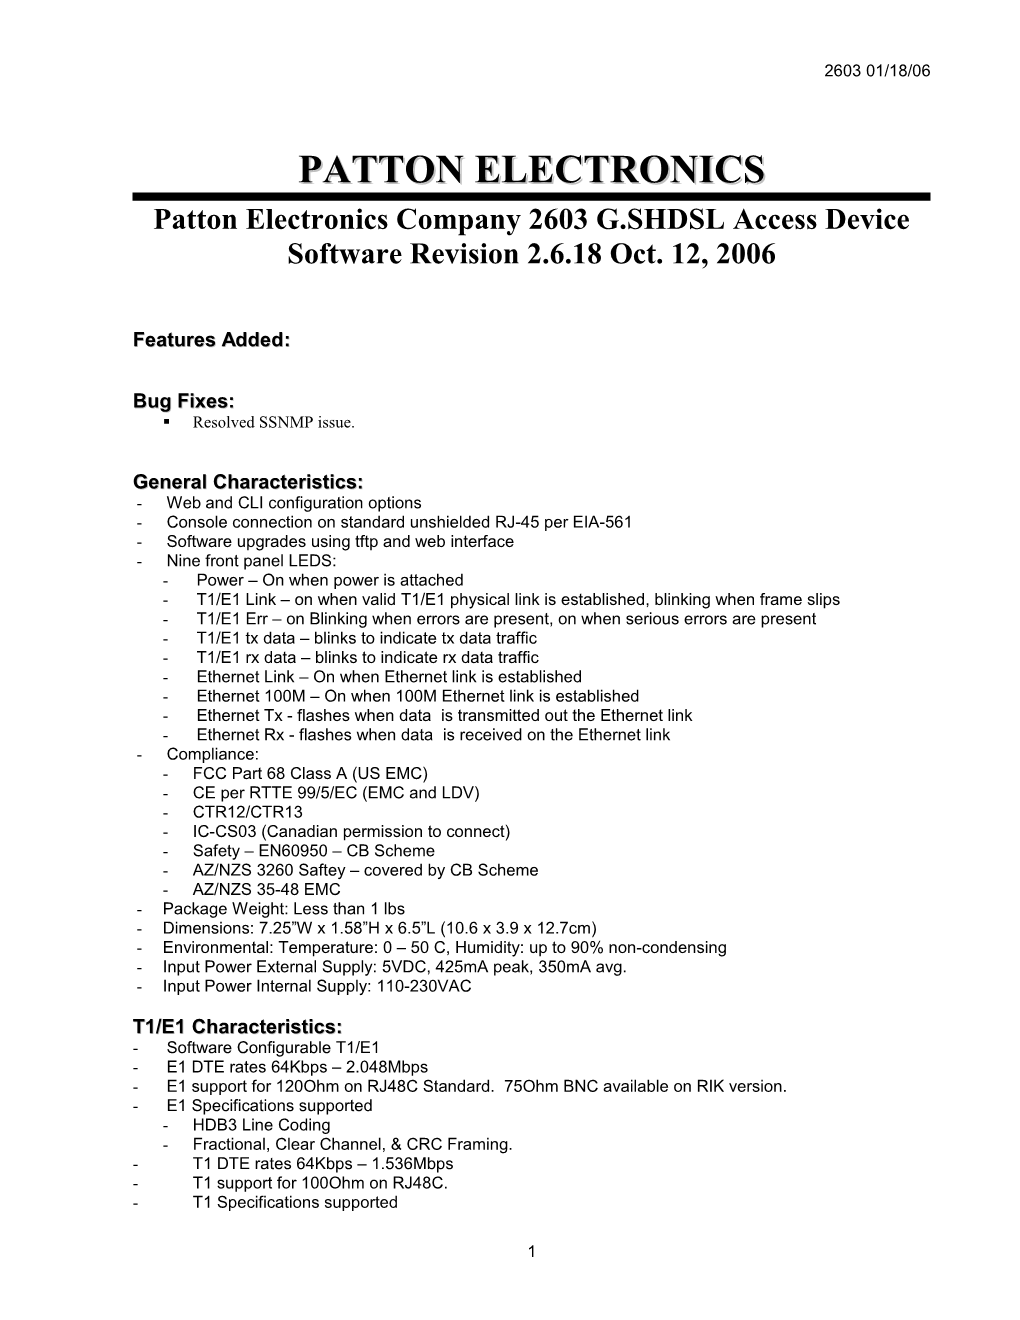 Patton Electronics Company 2603 G.SHDSL Access Devicesoftware Revision 2.6.18Oct. 12, 2006